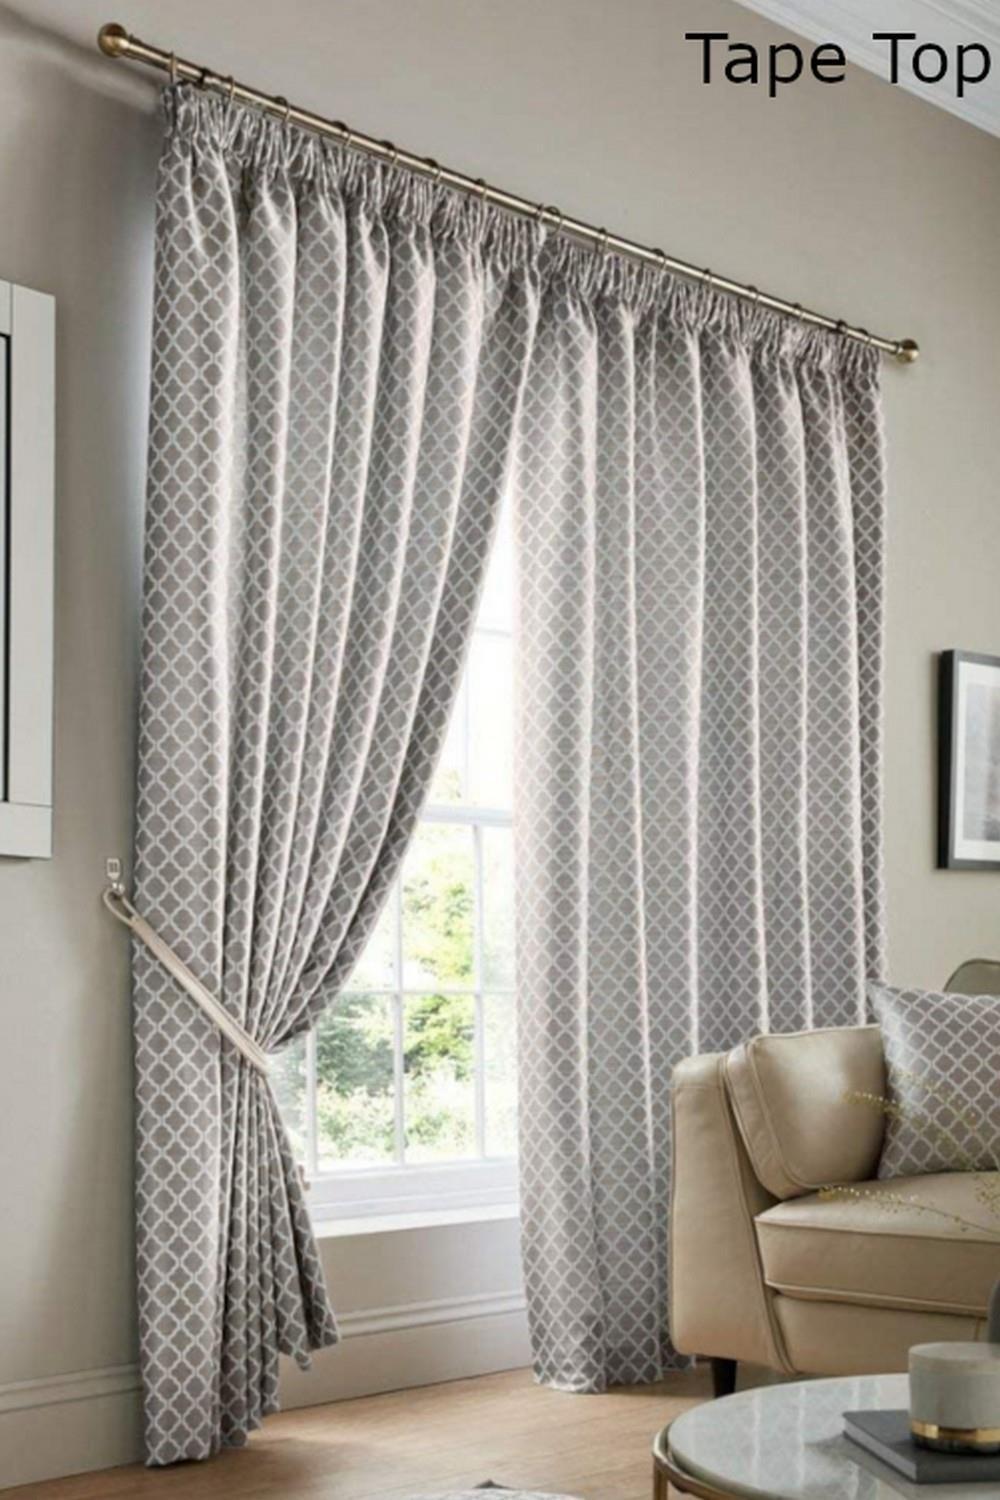 Cotswold Fully Lined Ready Made Pencil Pleat Taped Top Curtains